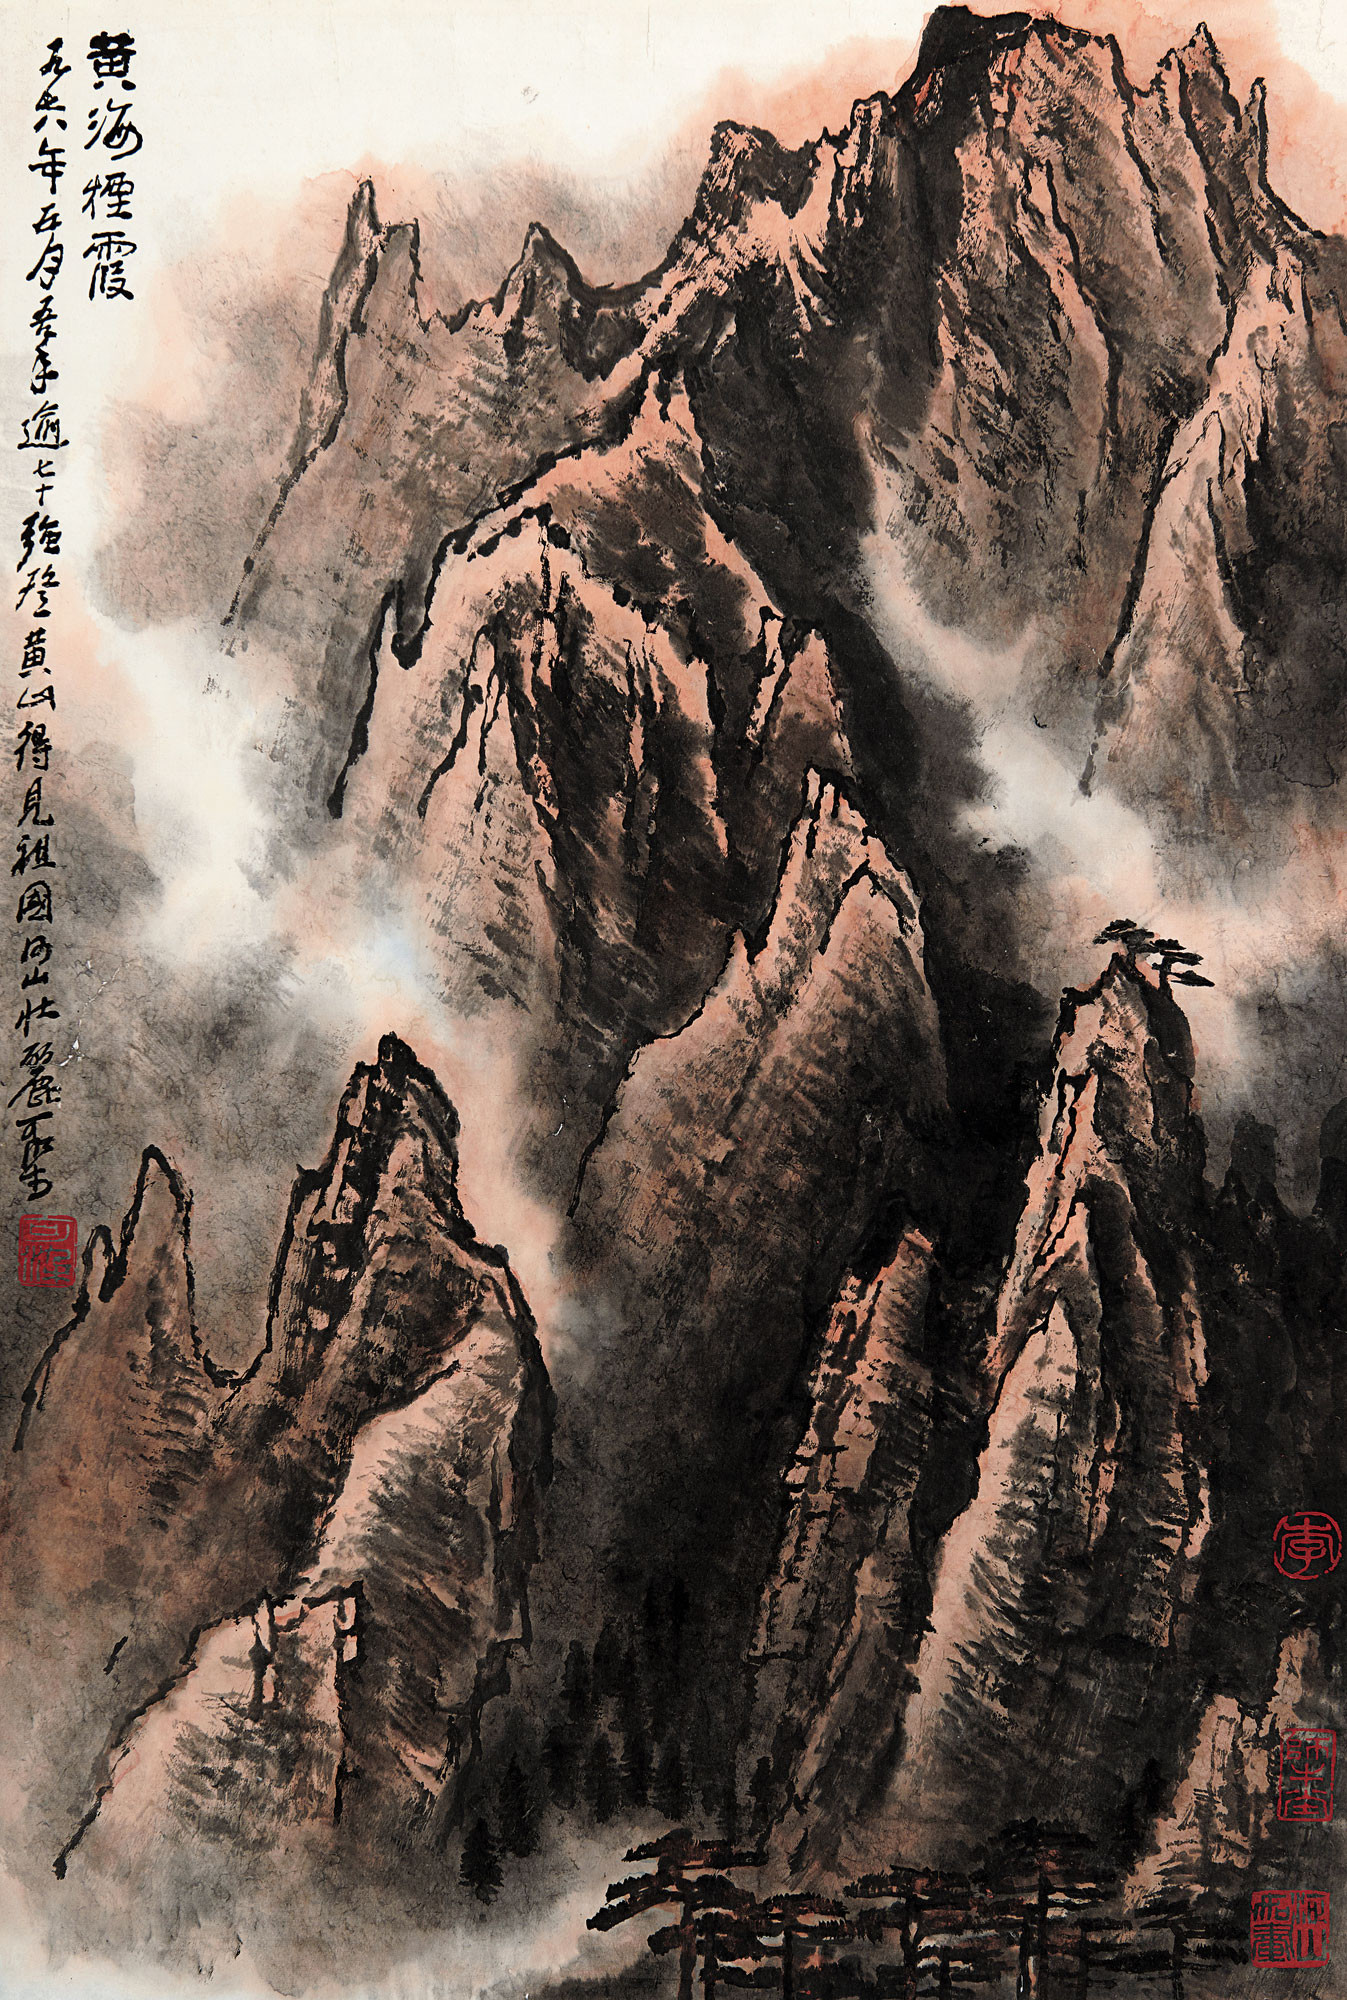 Landscape of Mountain Huang